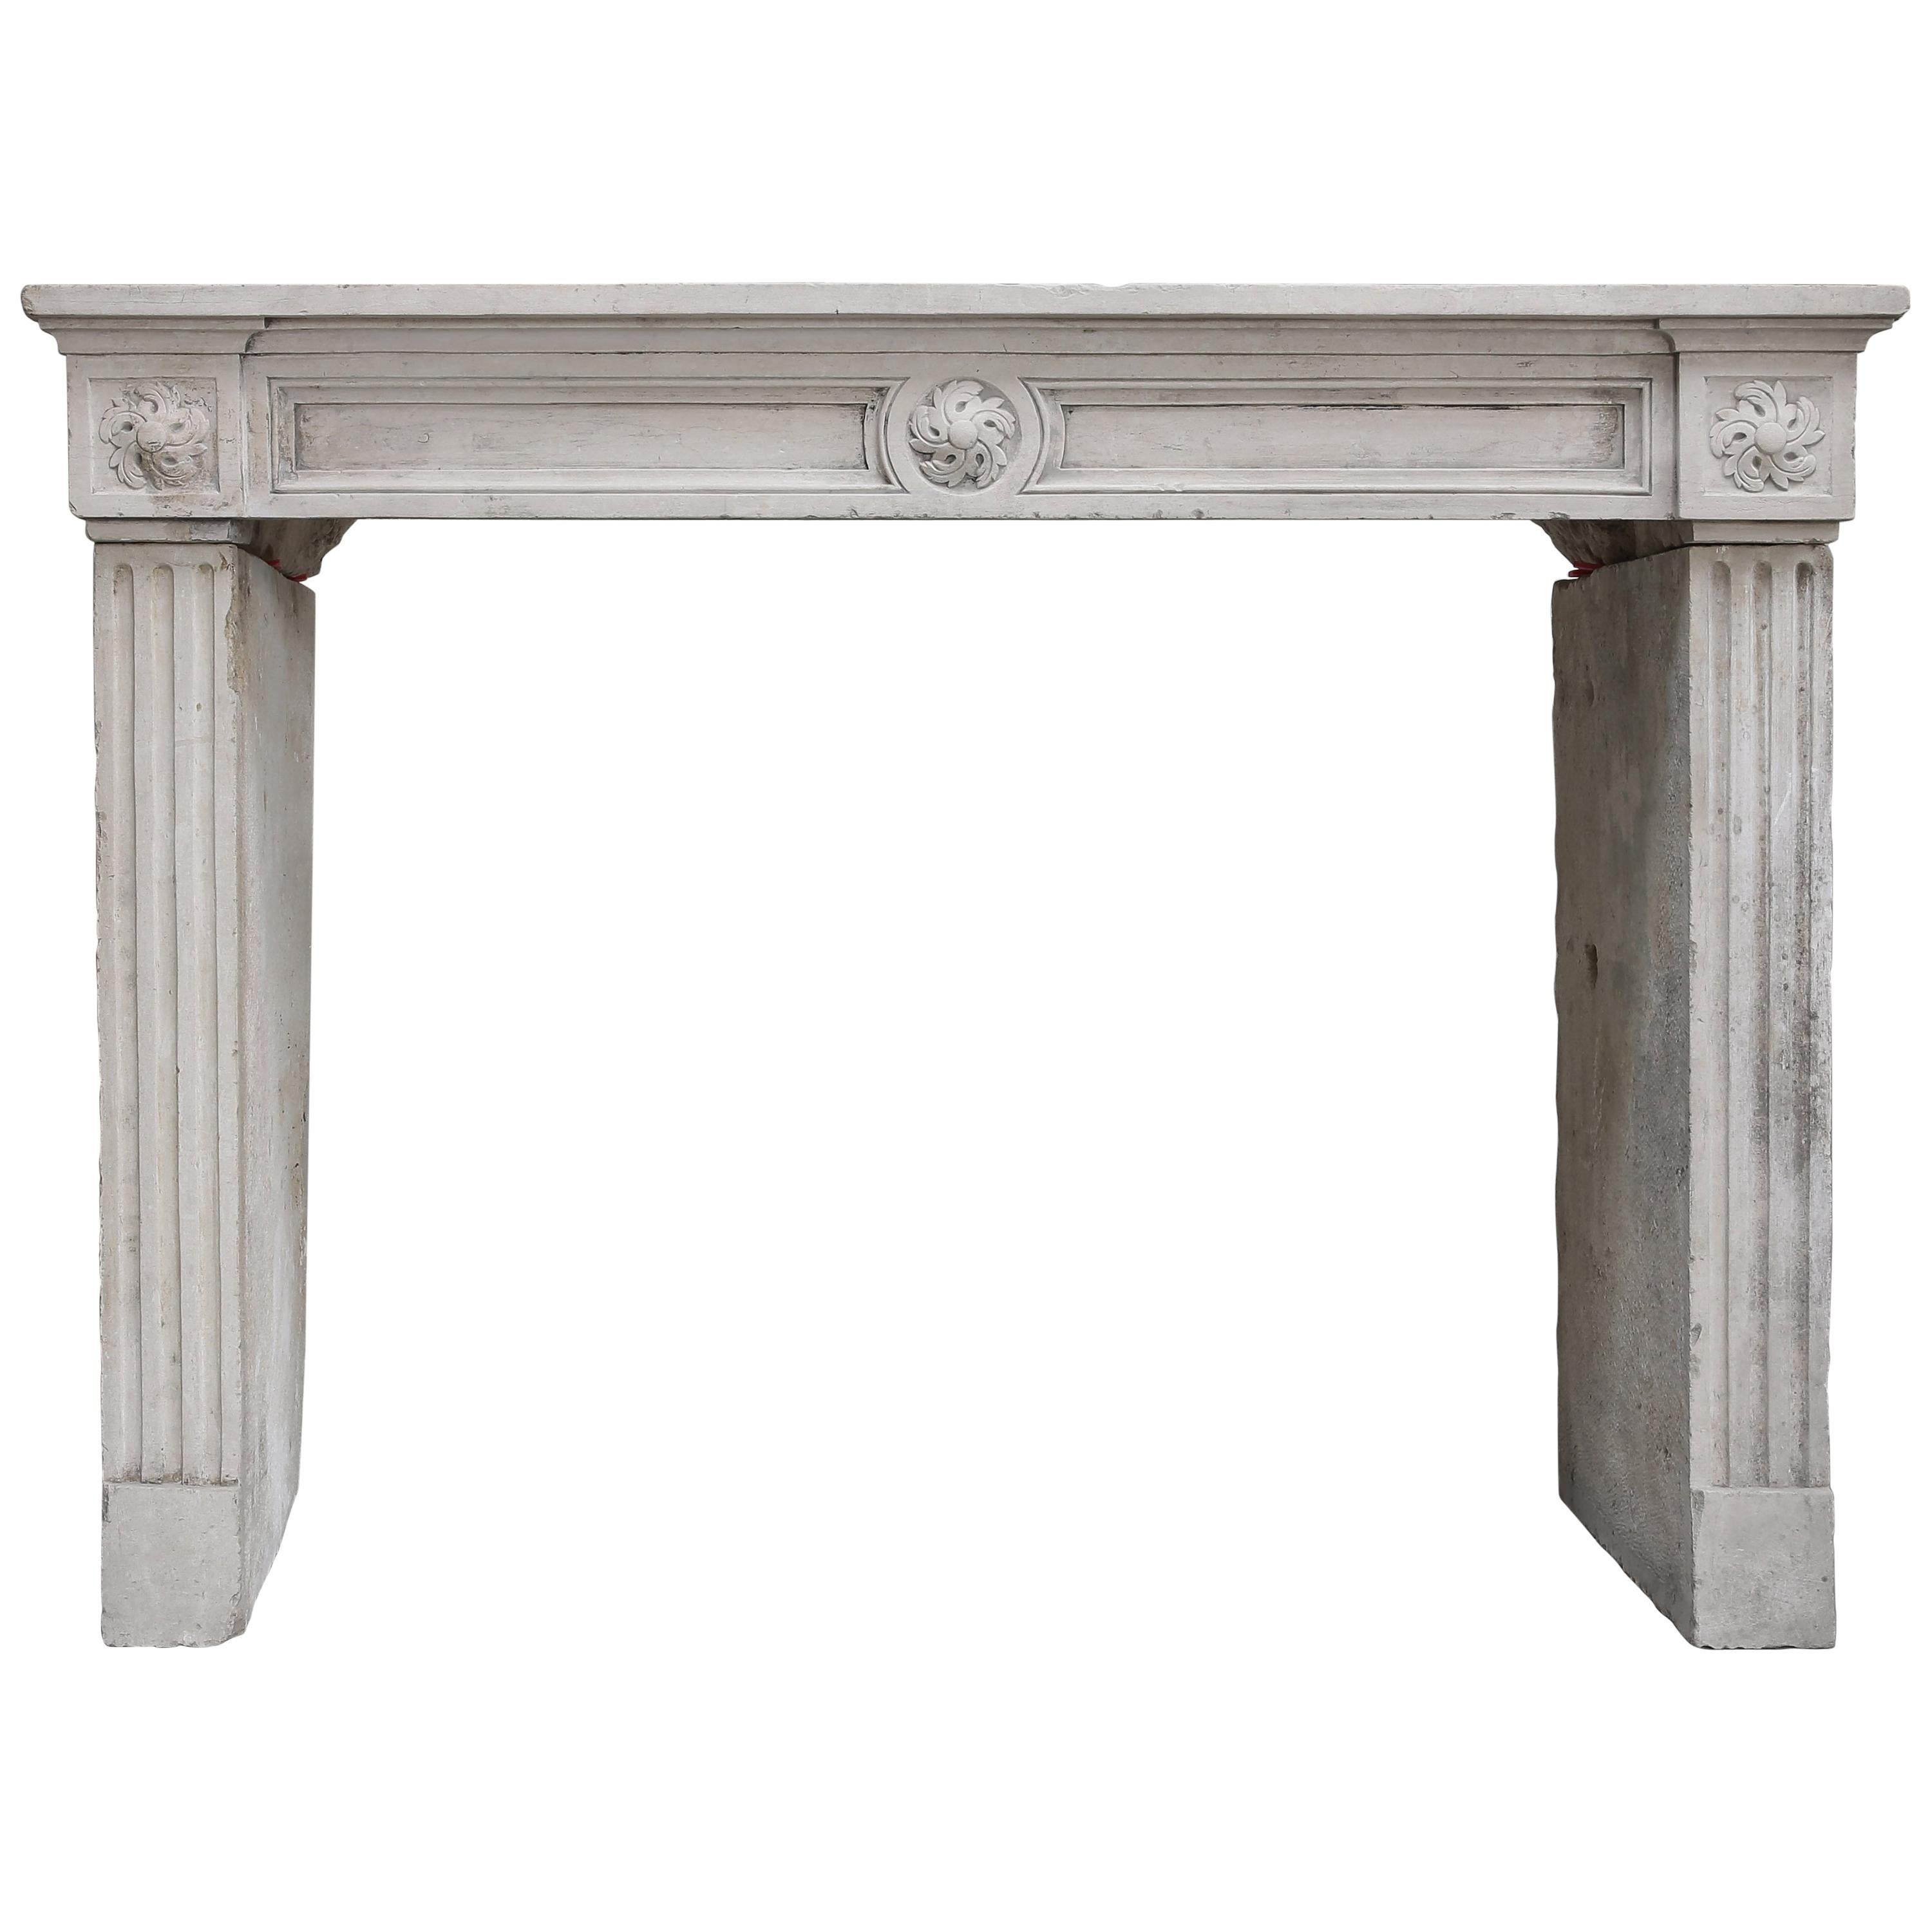 Special Antique Ornate Fireplace from Louis XVI, 18th Century